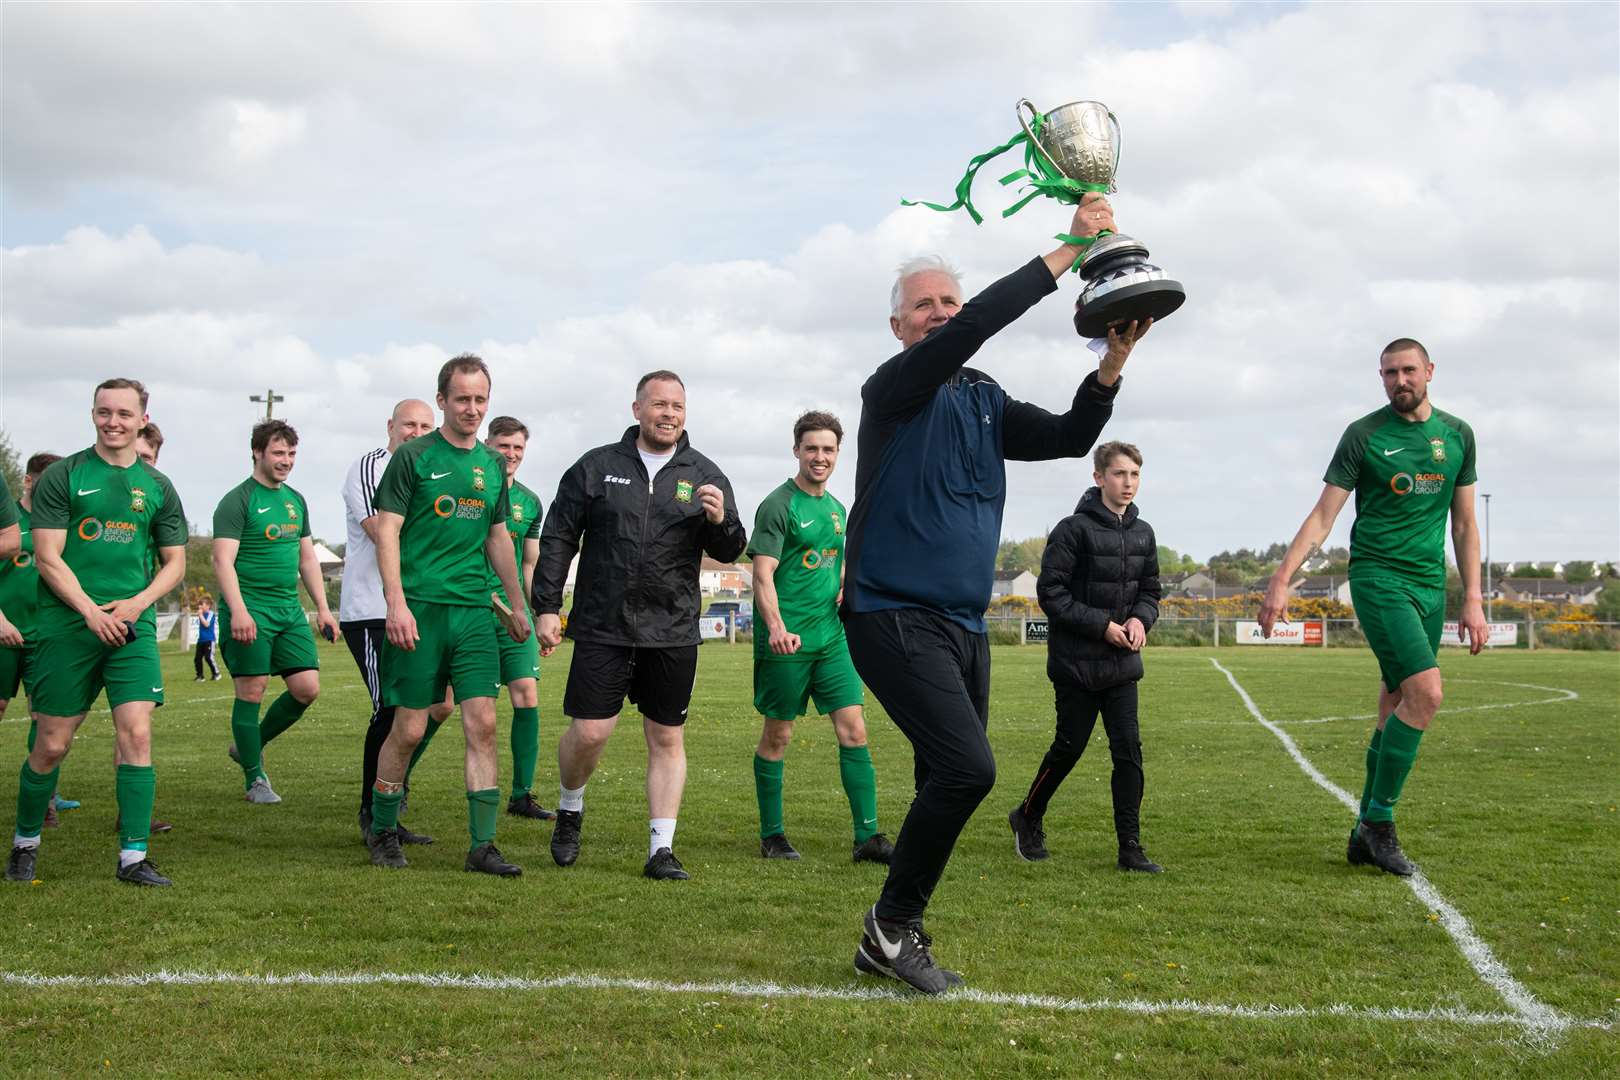 Dufftown manager Jim Stables celebrates...Dufftown FC (2) vs Forres Thistle FC (2) - Dufftown FC win 5-3 on penalties - Elginshire Cup Final held at Logie Park, Forres 14/05/2022...Picture: Daniel Forsyth..